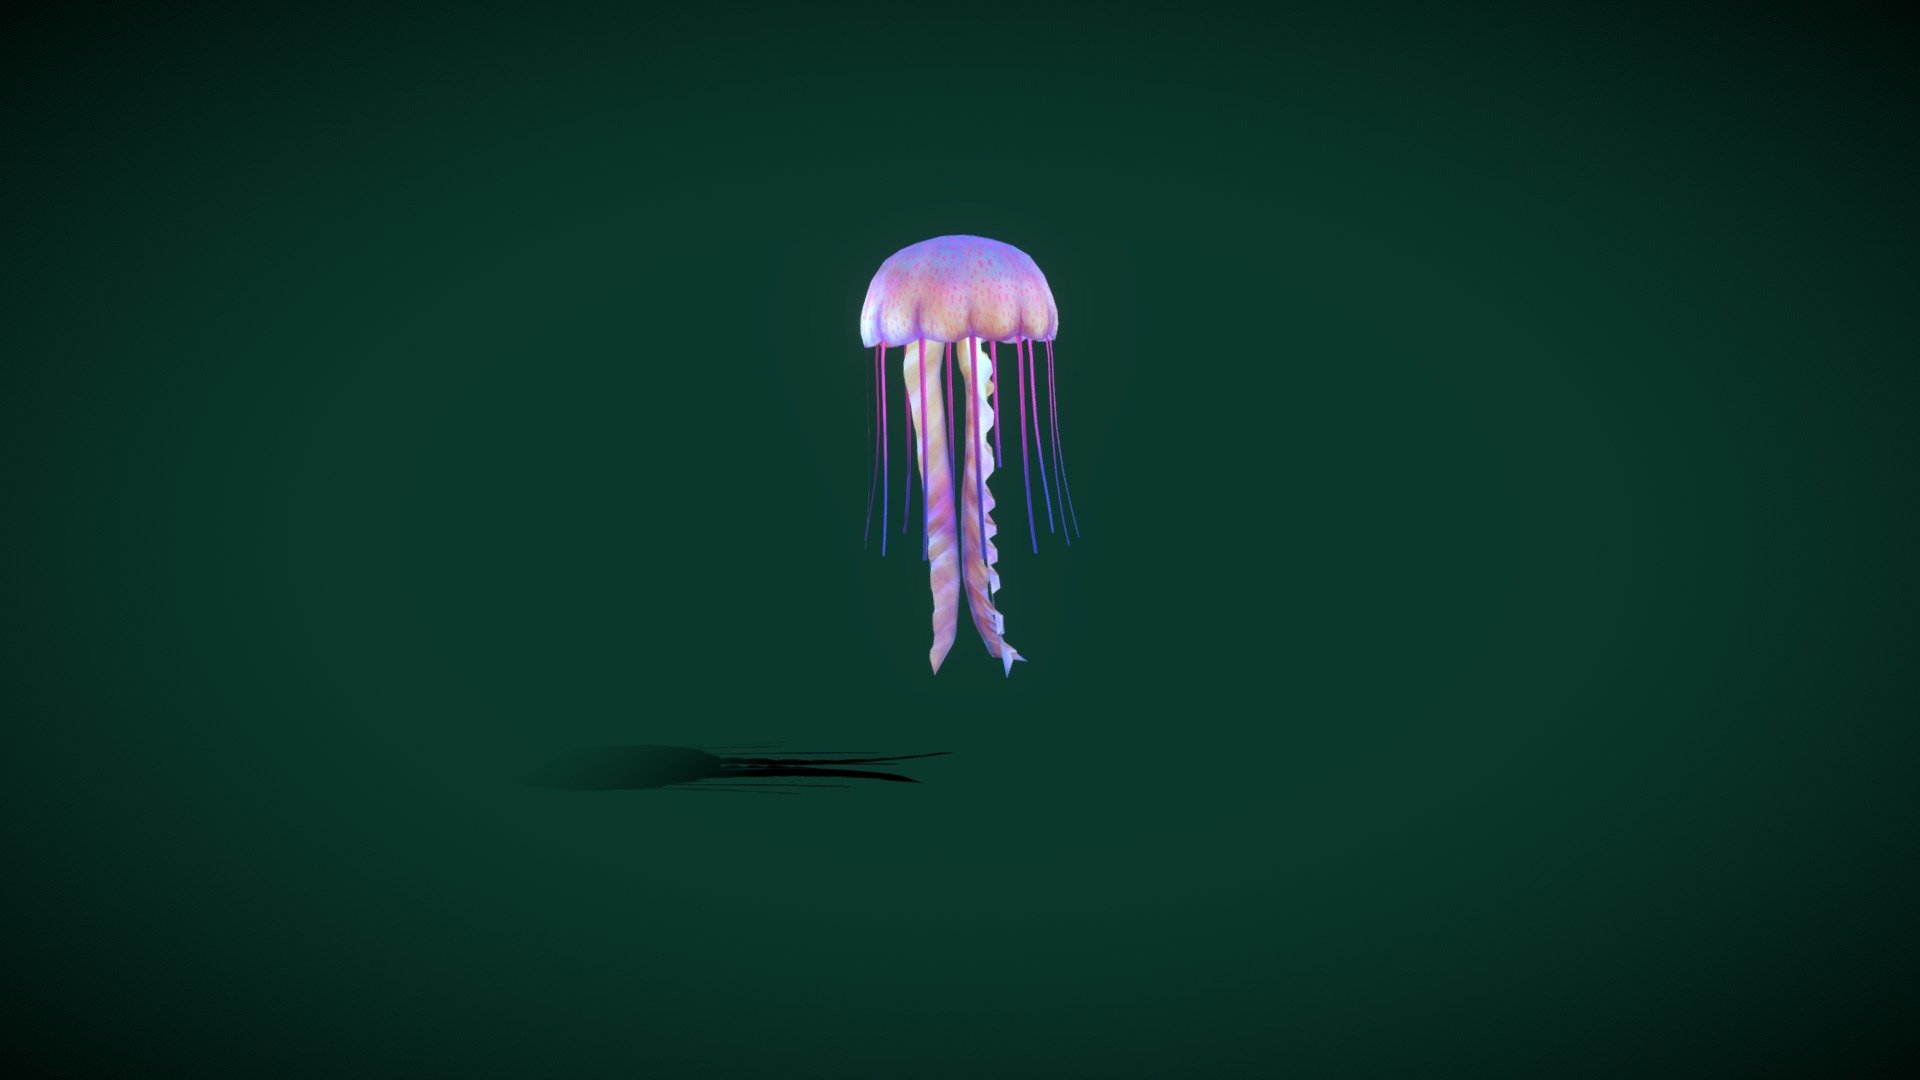 Animated Sea JellyFish
4K Texture and One animation and Low poly

Diffuse color
Emissive 
Occlusion
Normal Map

Floating Animation

Jellyfish and sea jellies are the informal common names given to the medusa-phase of certain gelatinous members of the subphylum Medusozoa, a major part of the phylum Cnidaria 3d model